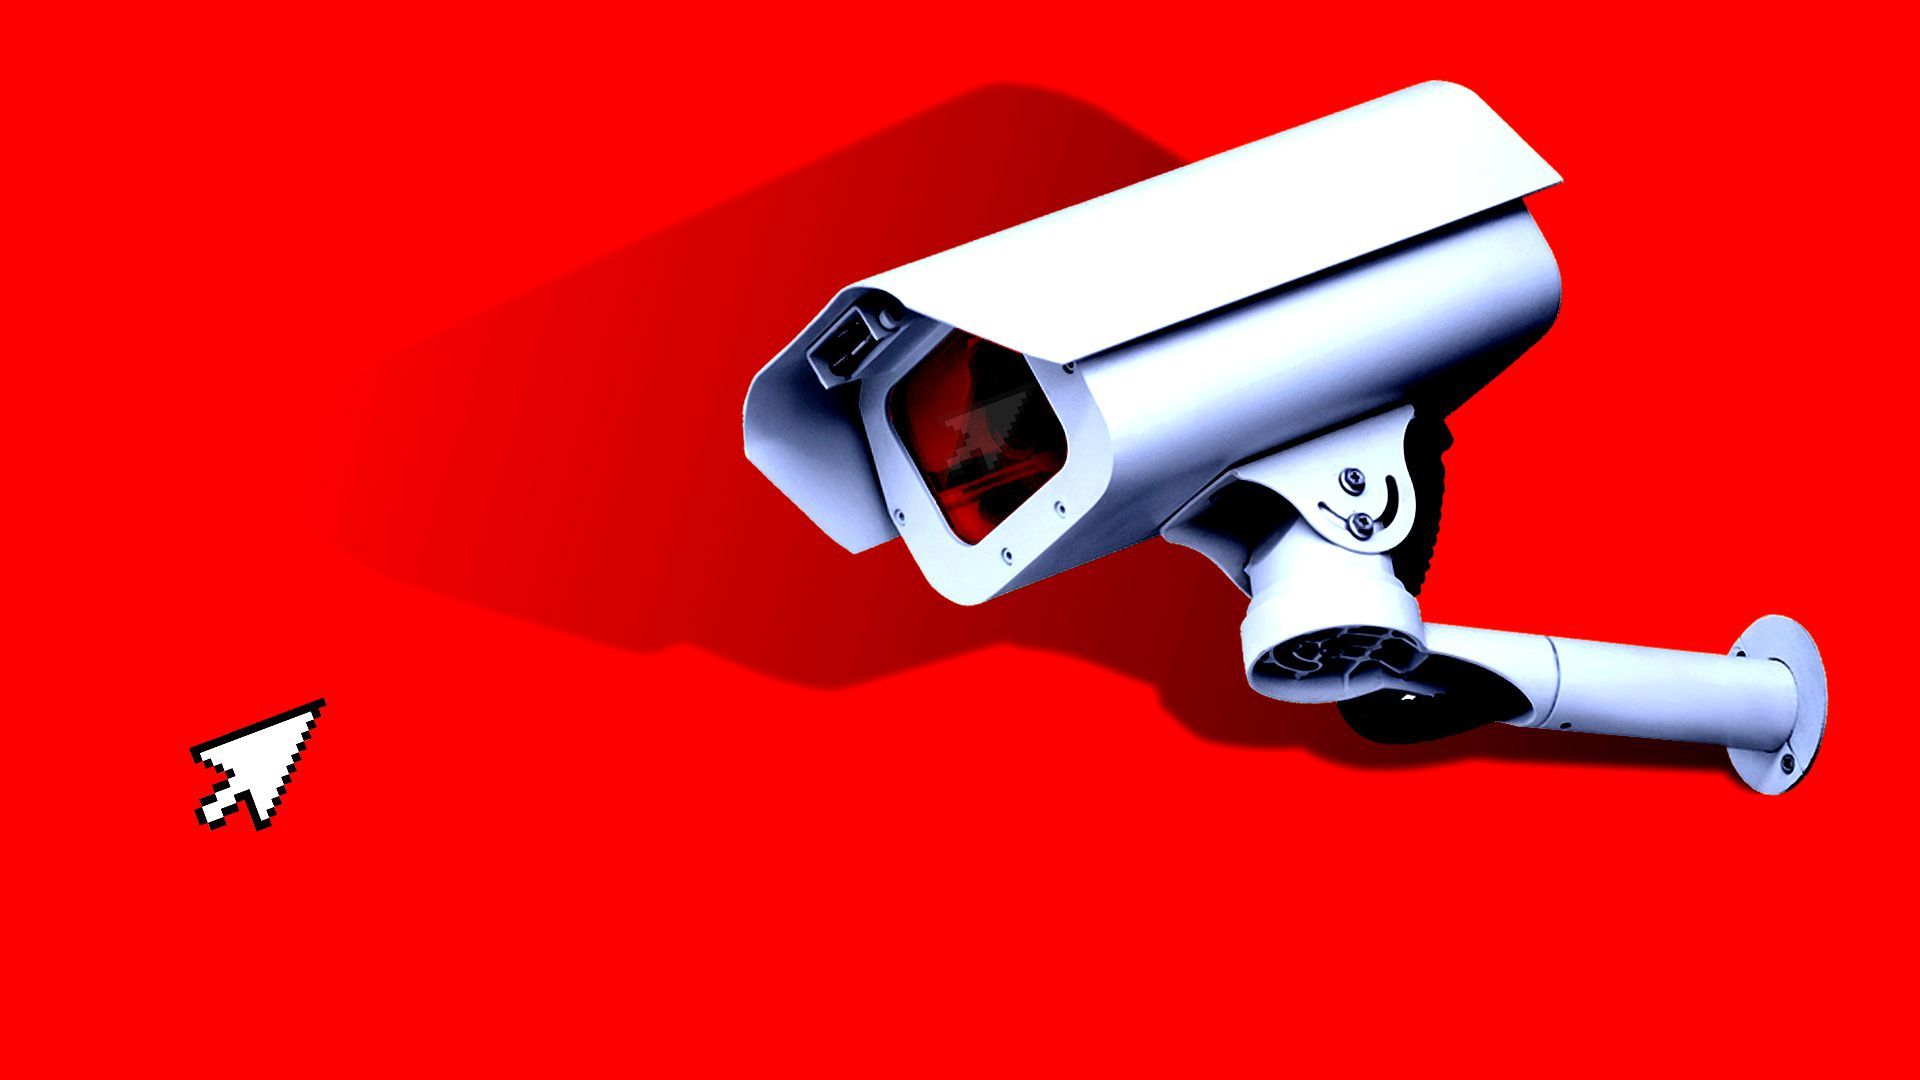 A security camera points at a computer cursor against a red backdrop